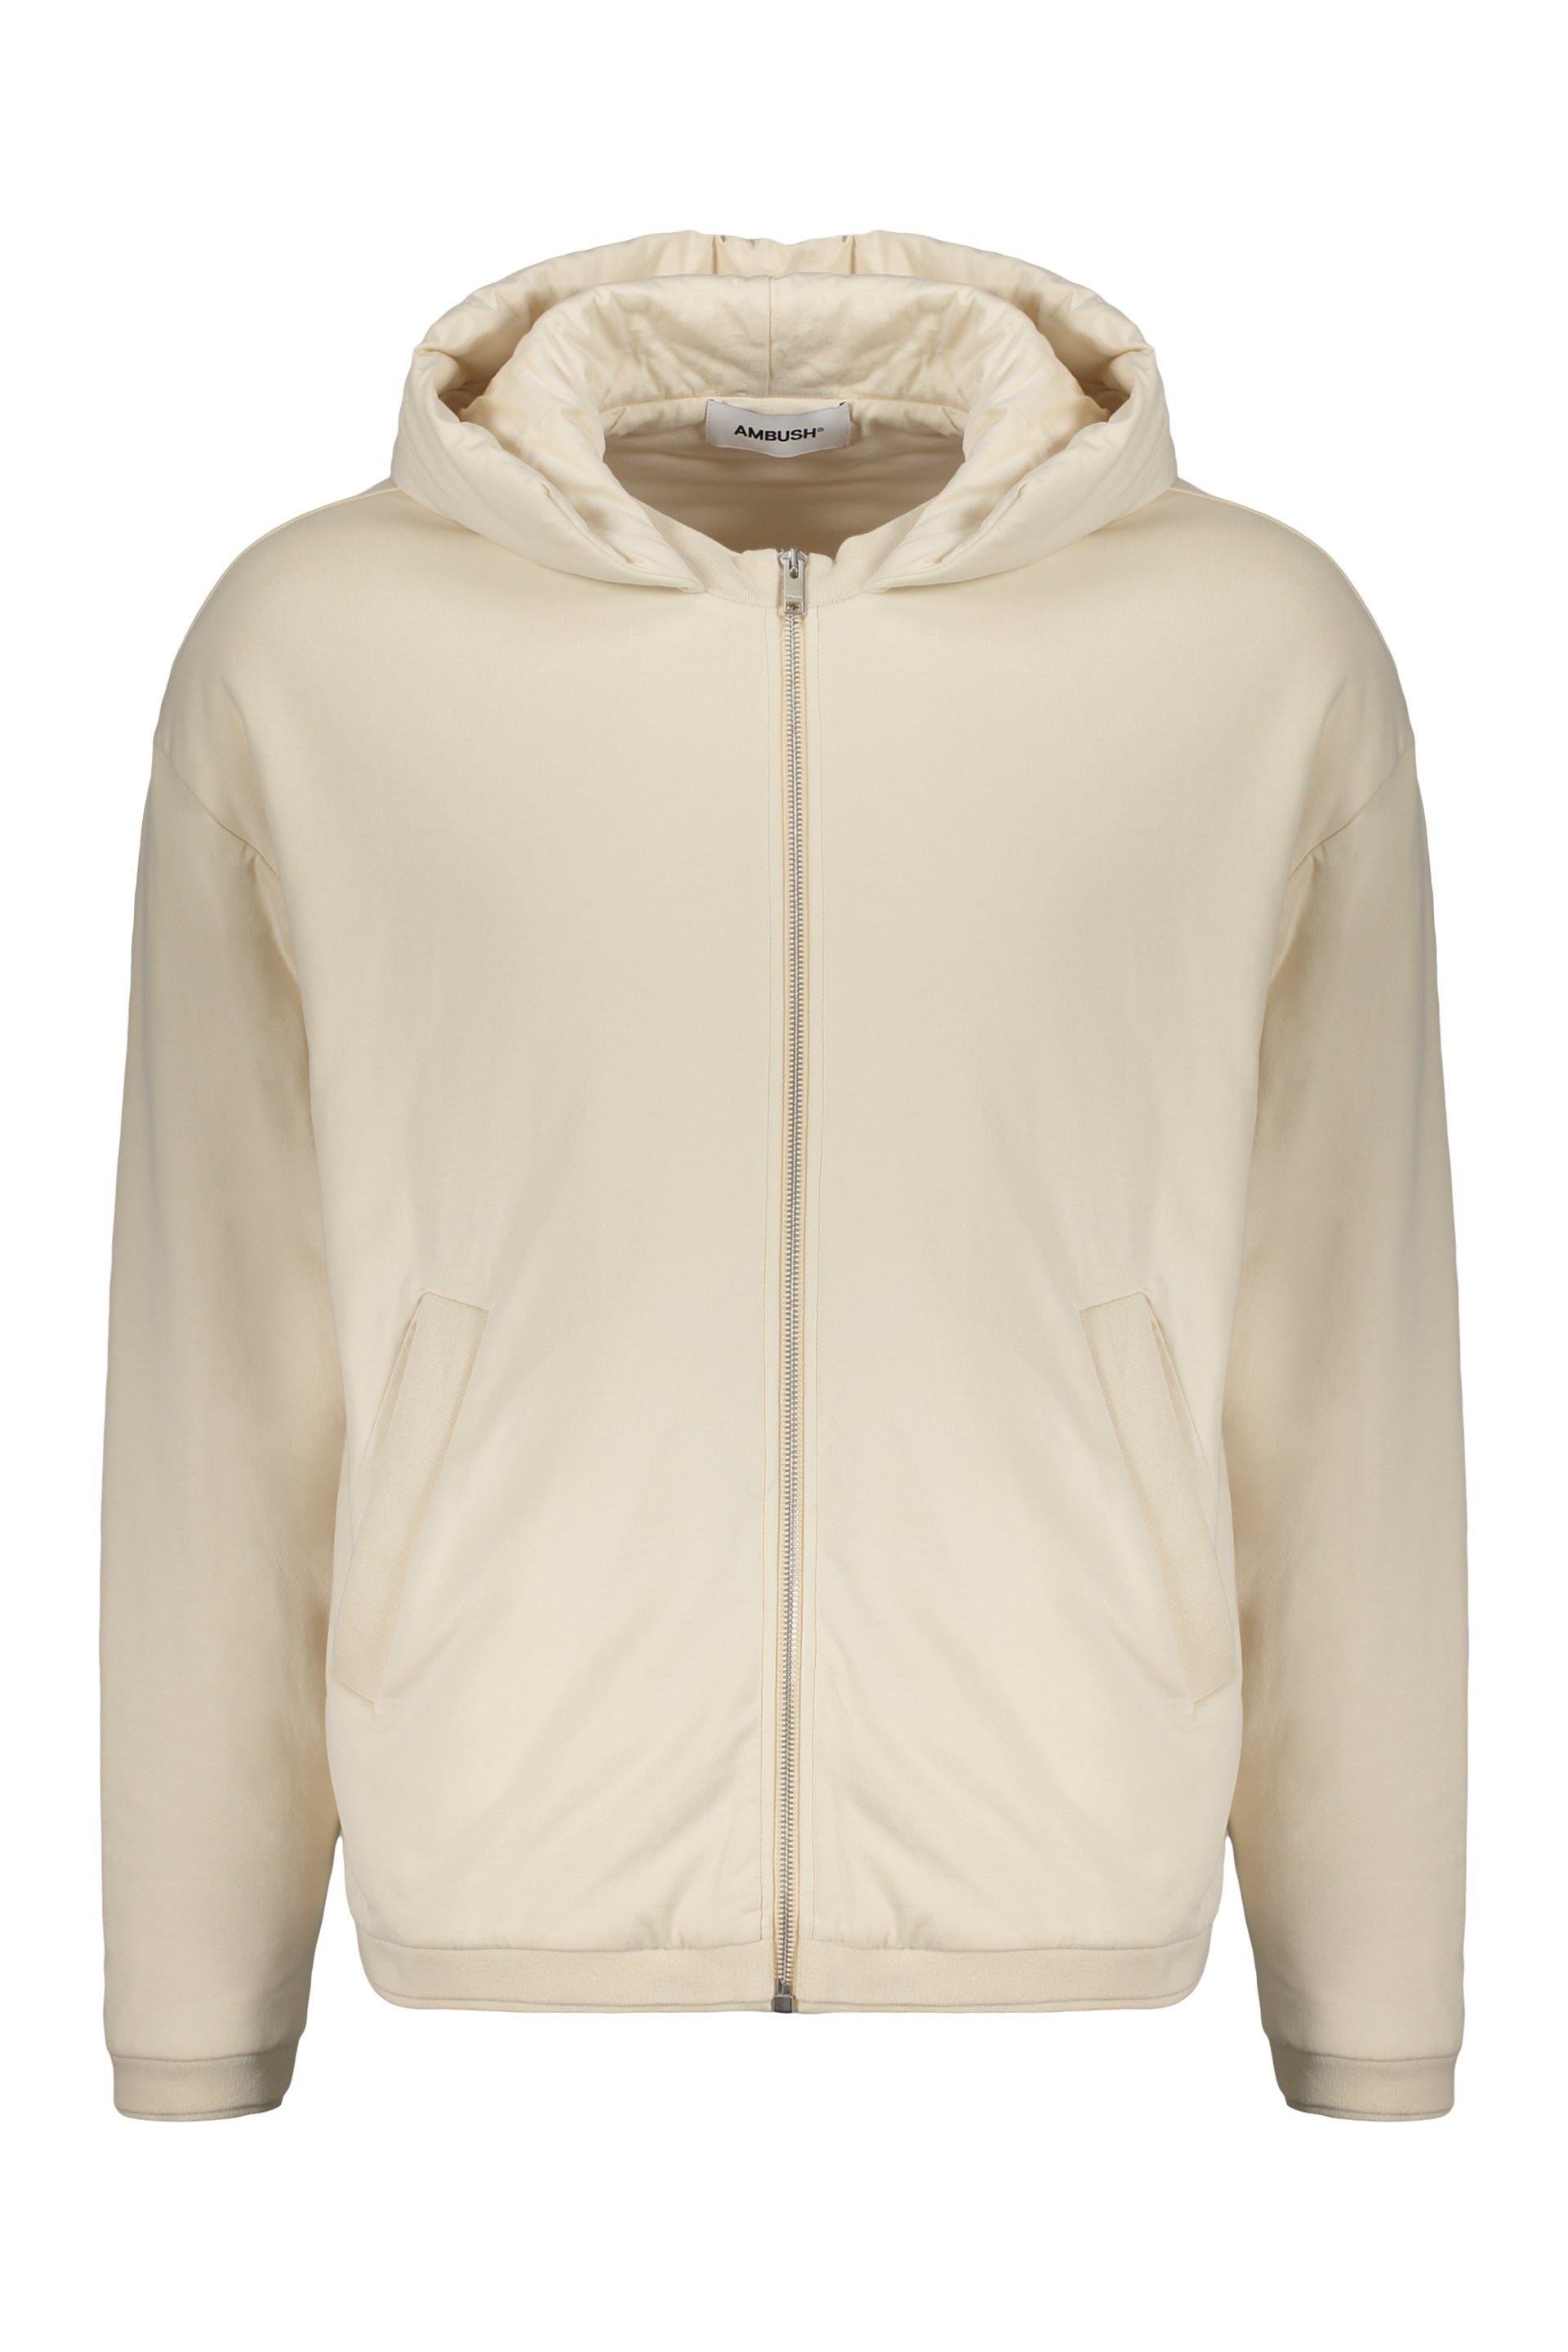 AMBUSH-OUTLET-SALE-Full-zip-hoodie-Strick-S-ARCHIVE-COLLECTION.jpg